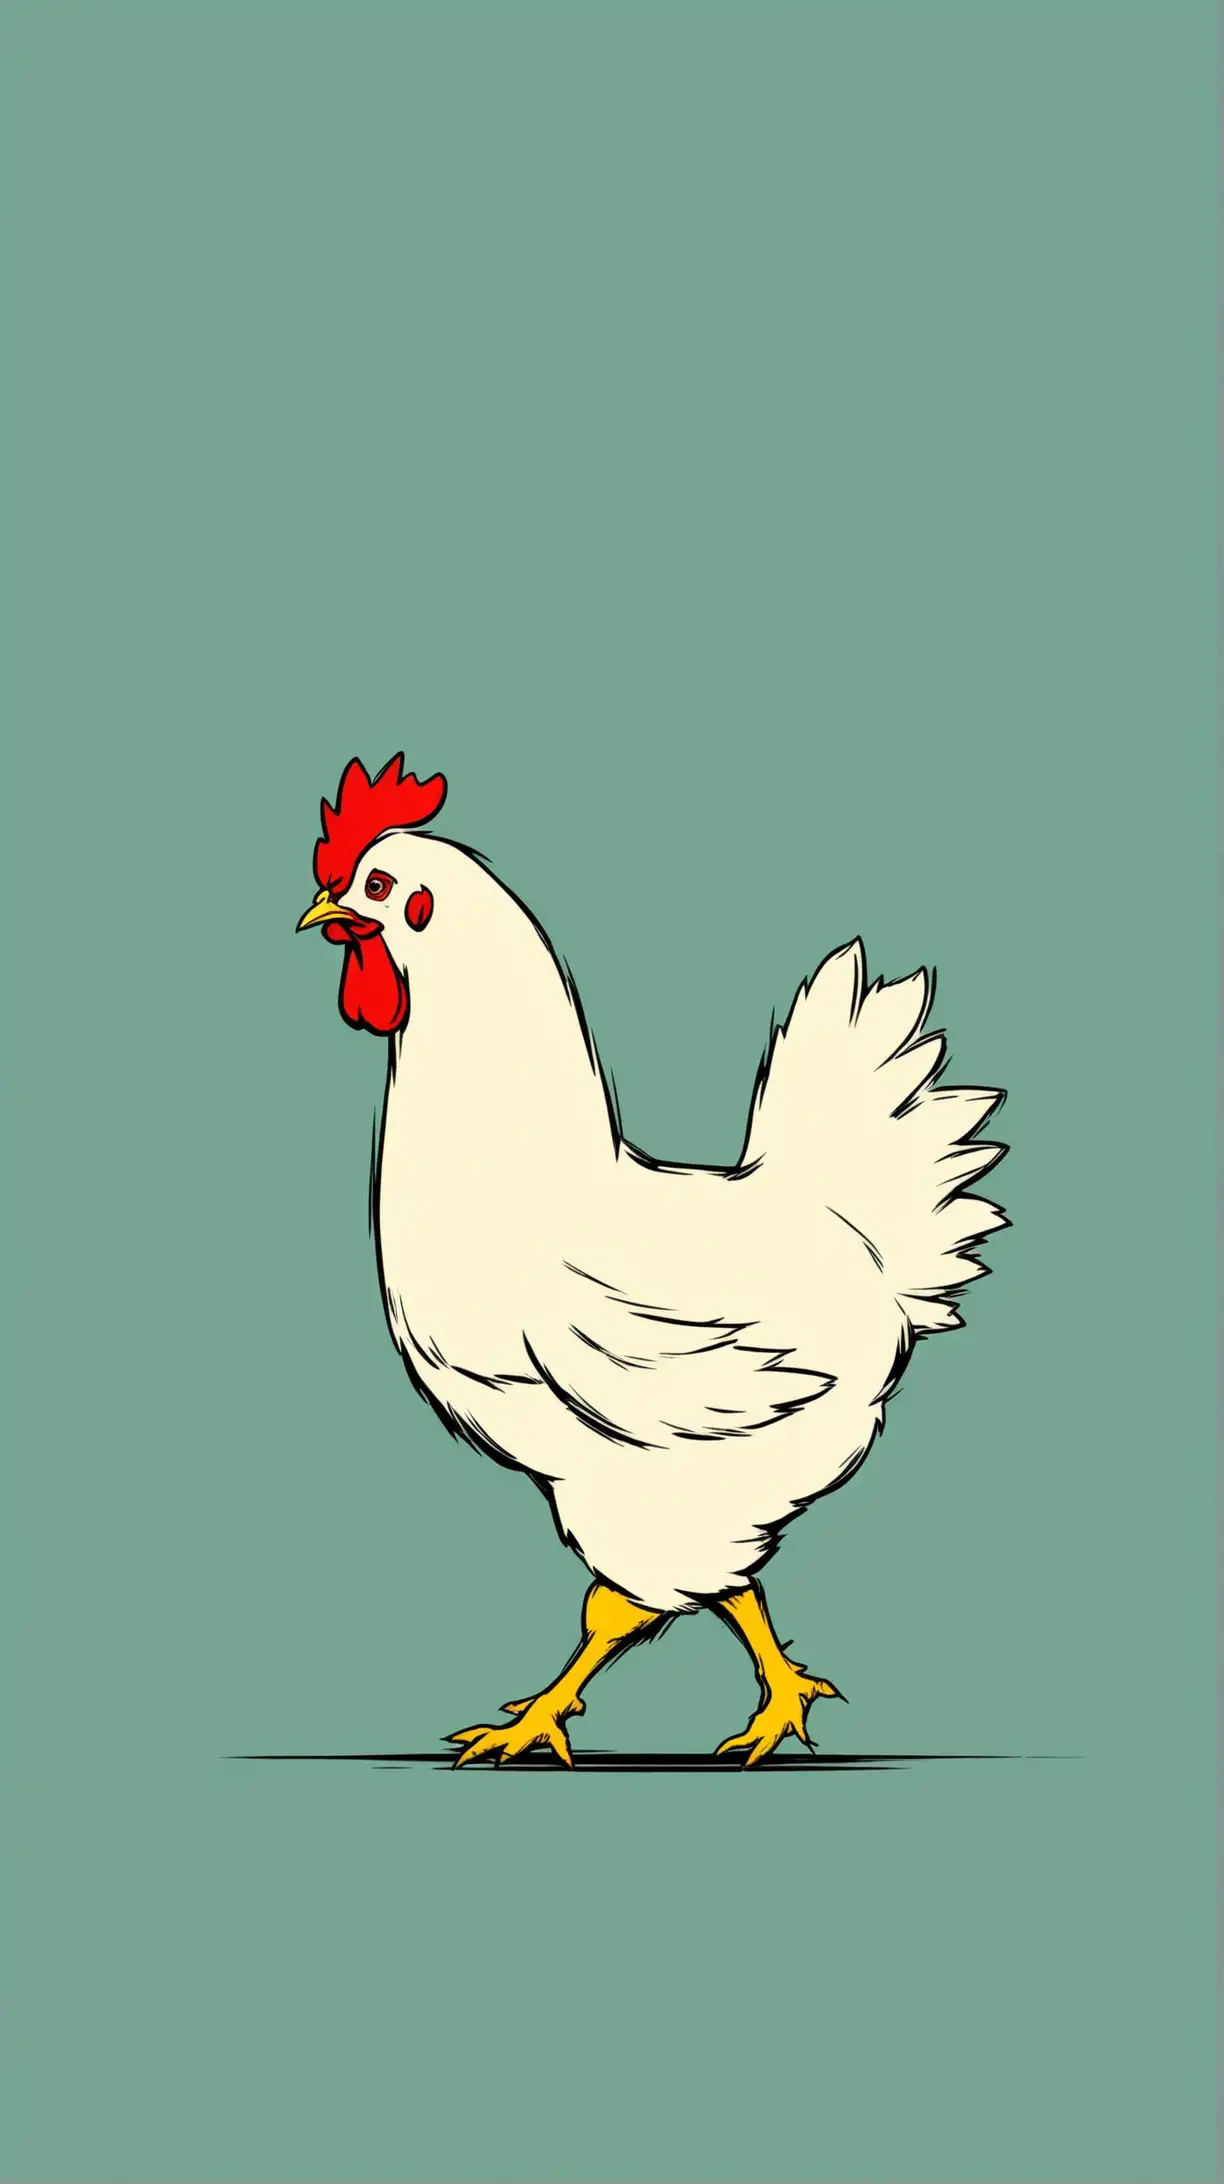 Comic Book Style Chicken Walking with Simple Background